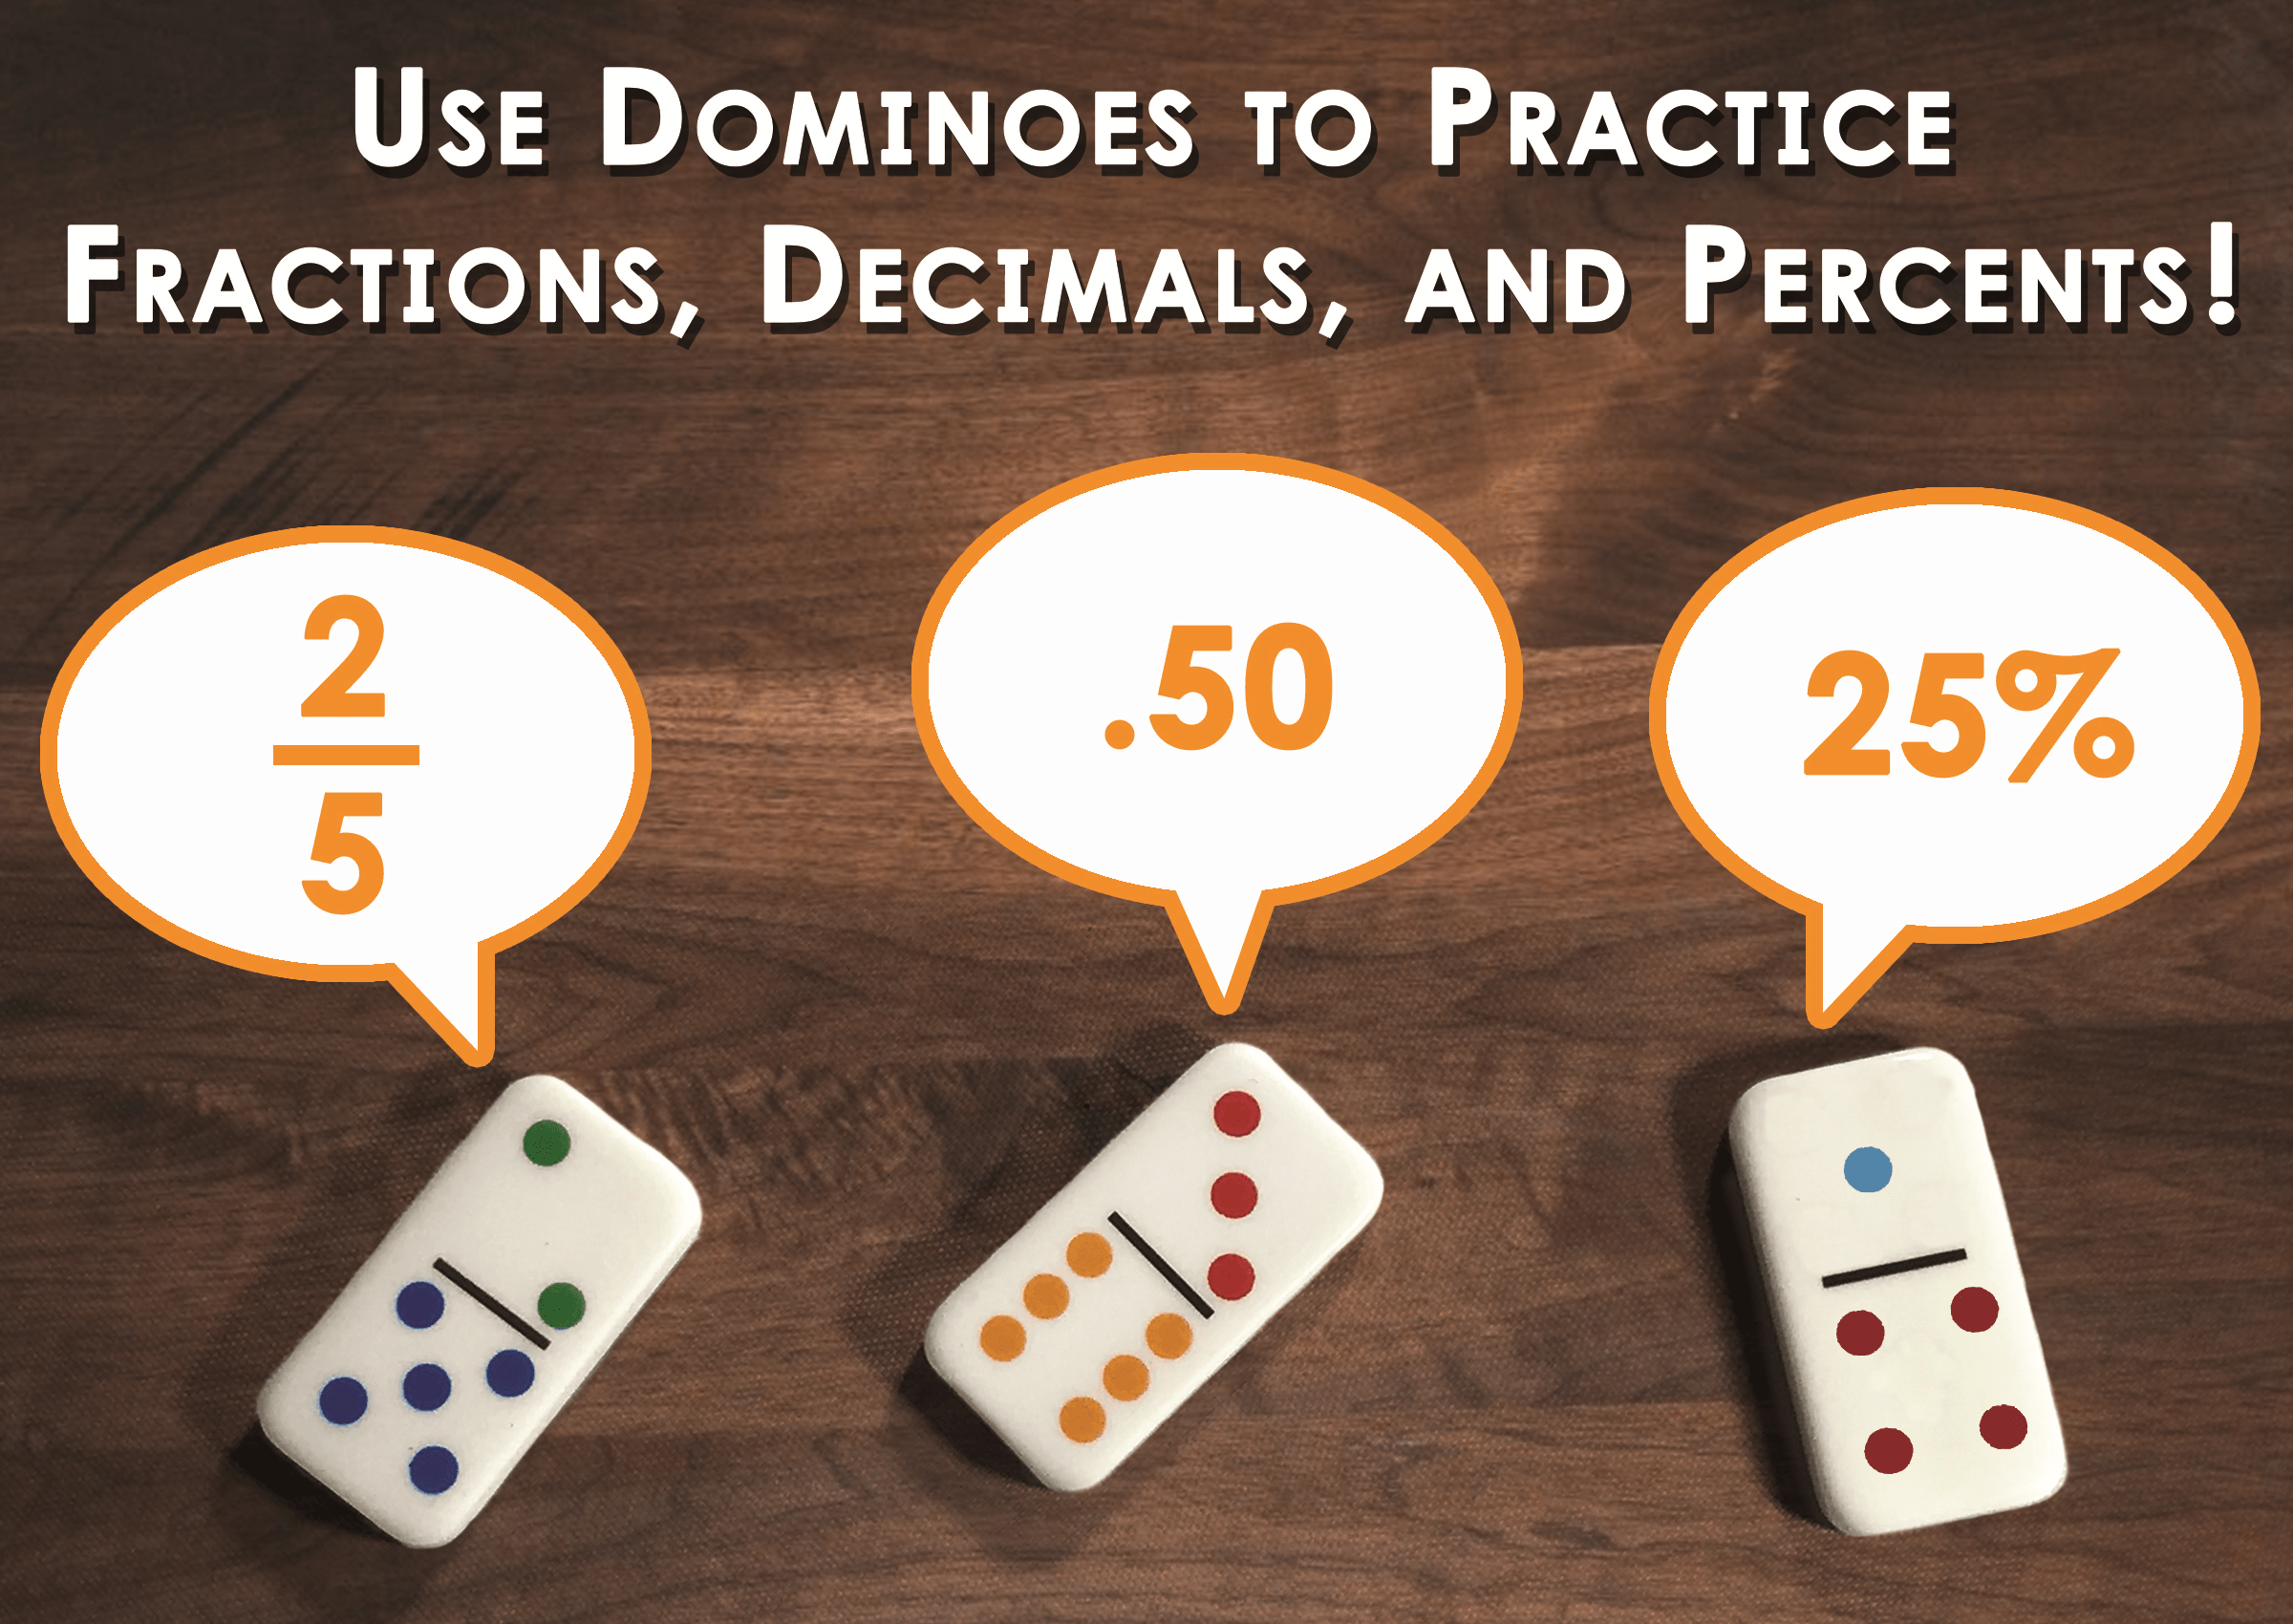 Practice Fractions, Decimals, and Percents with Dominoes! 